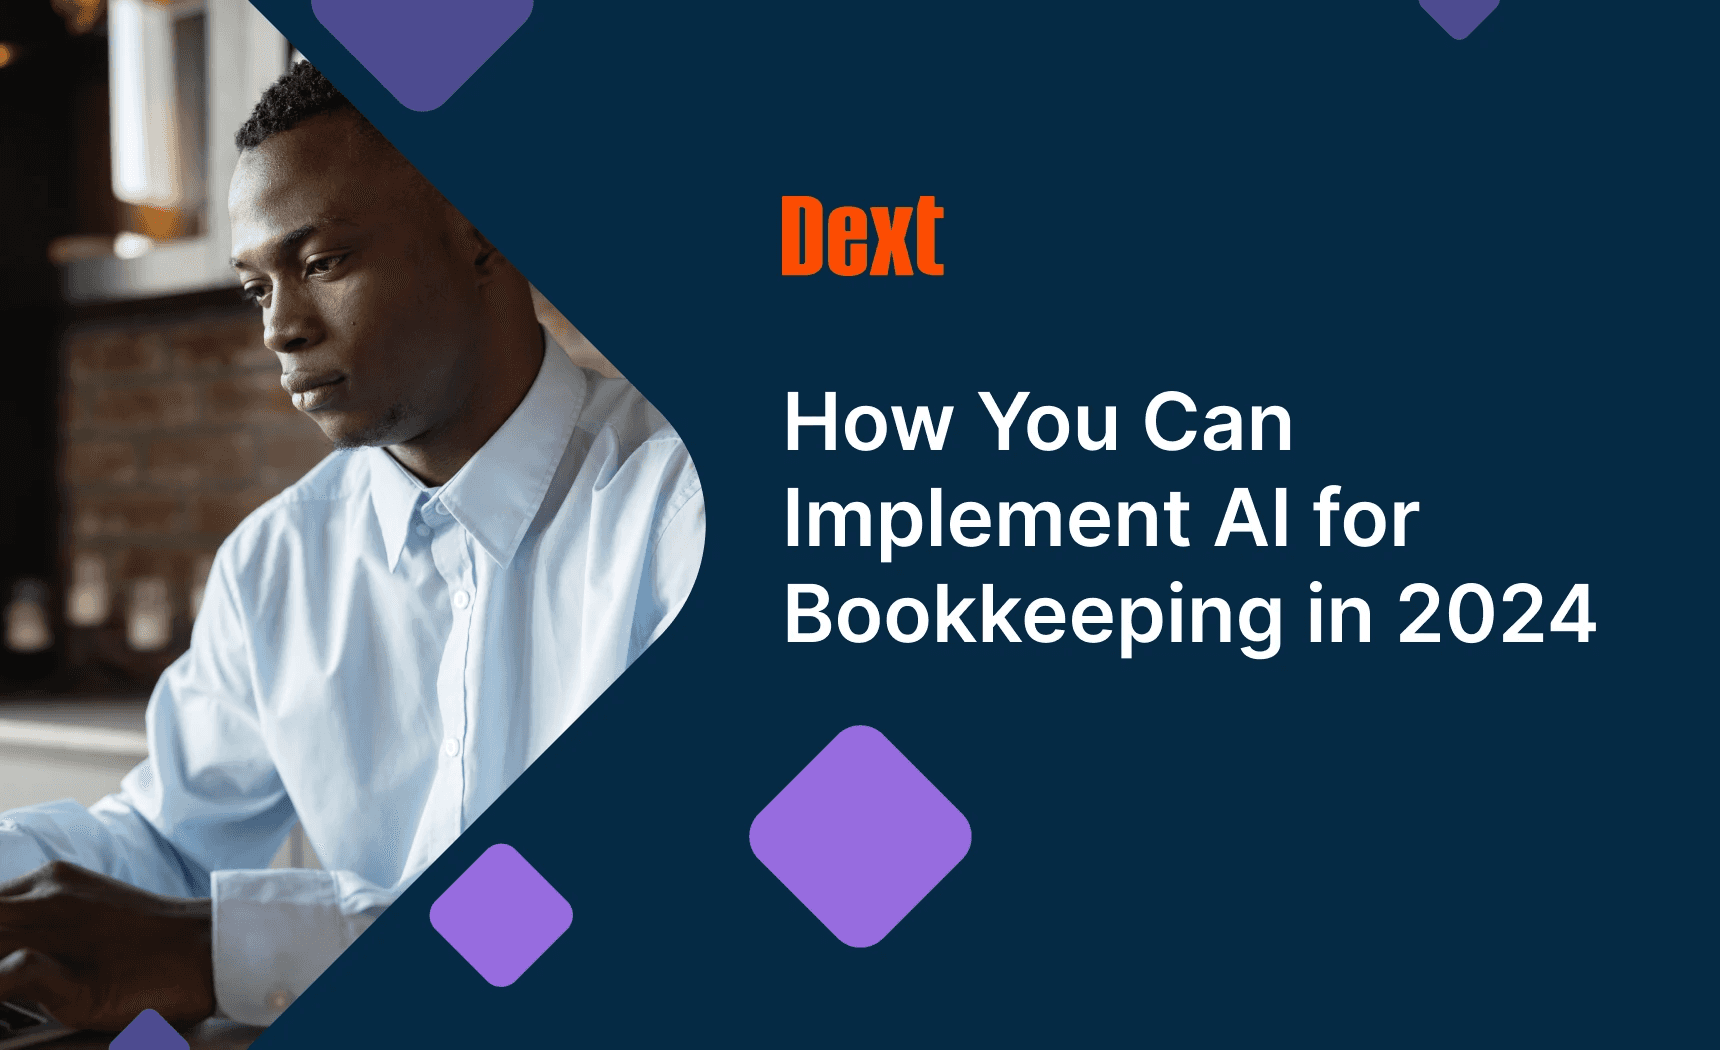 How You Can Implement AI for Bookkeeping in 2024